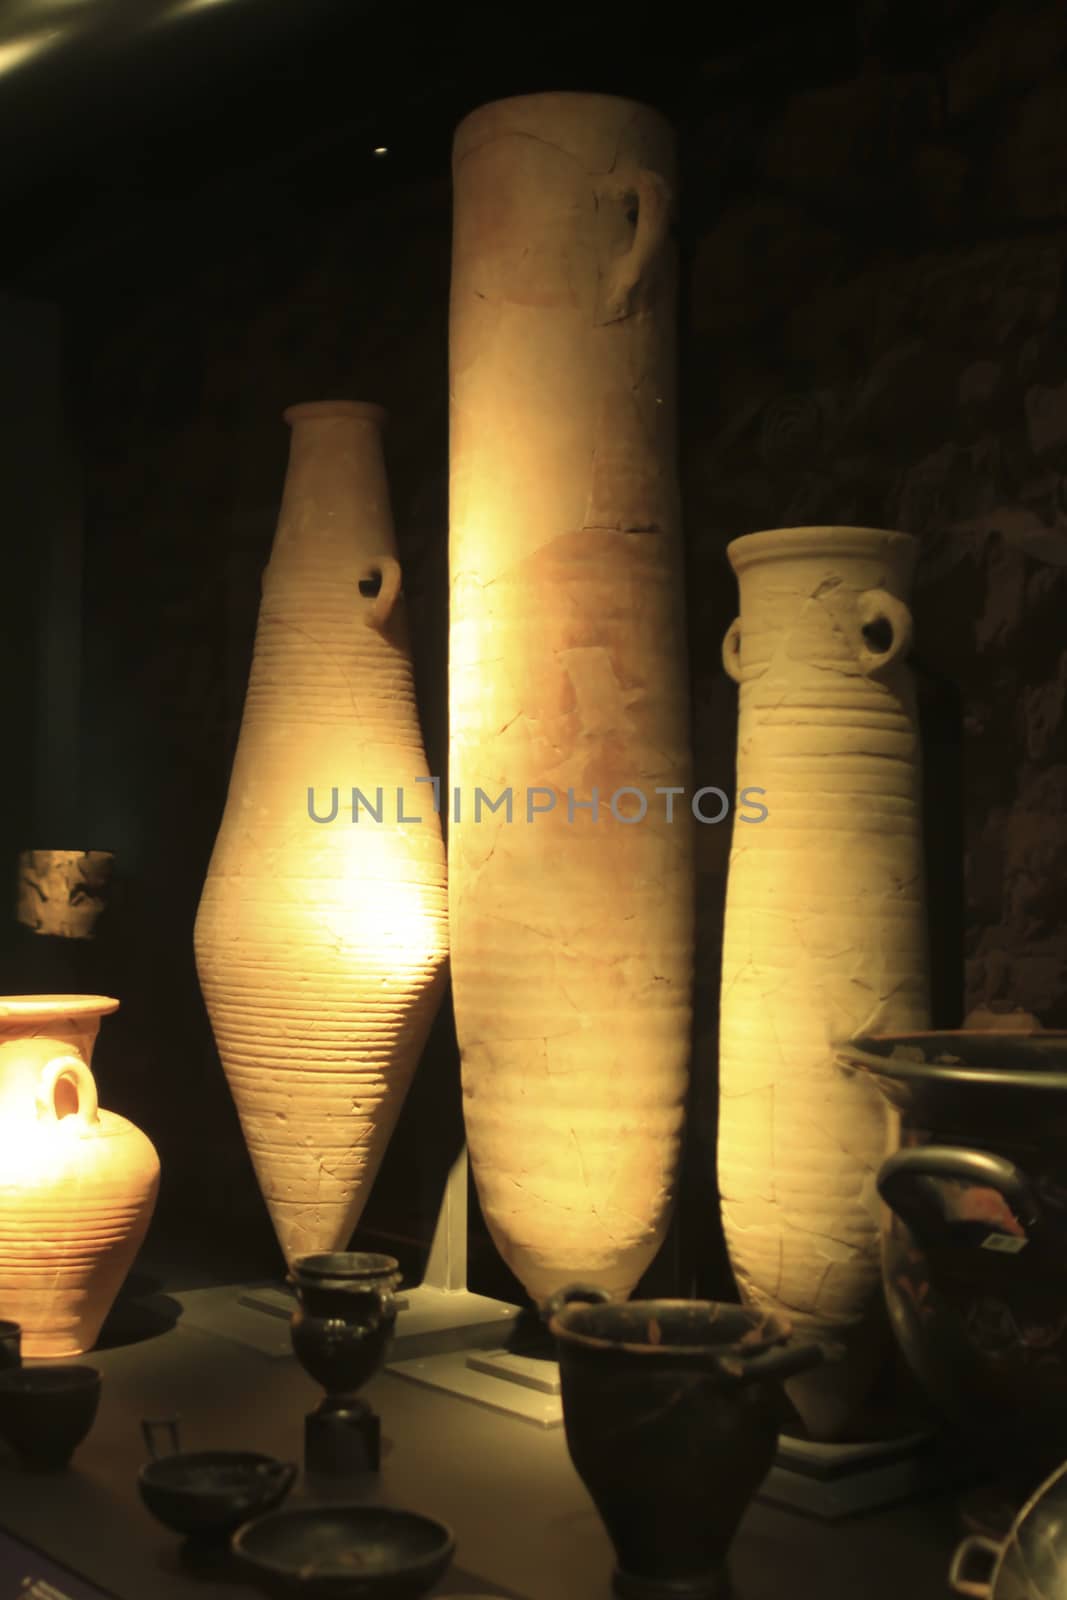 Punic pitchers and amphora found at Alicante province sites by soniabonet